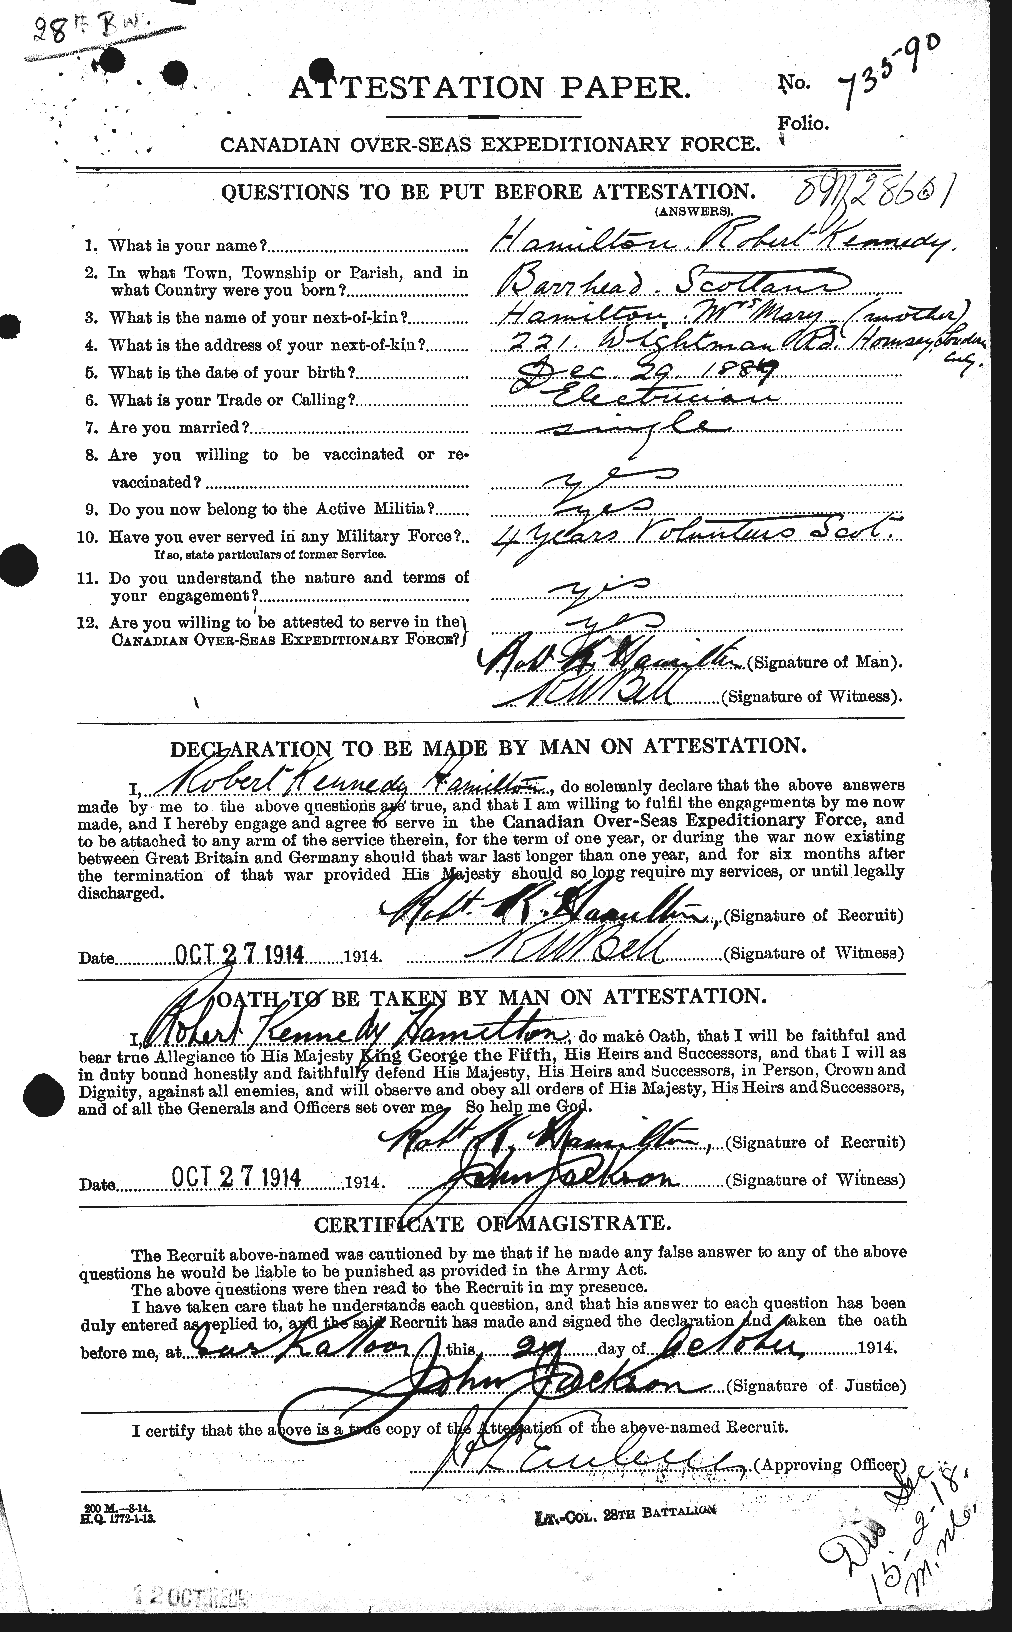 Personnel Records of the First World War - CEF 373263a